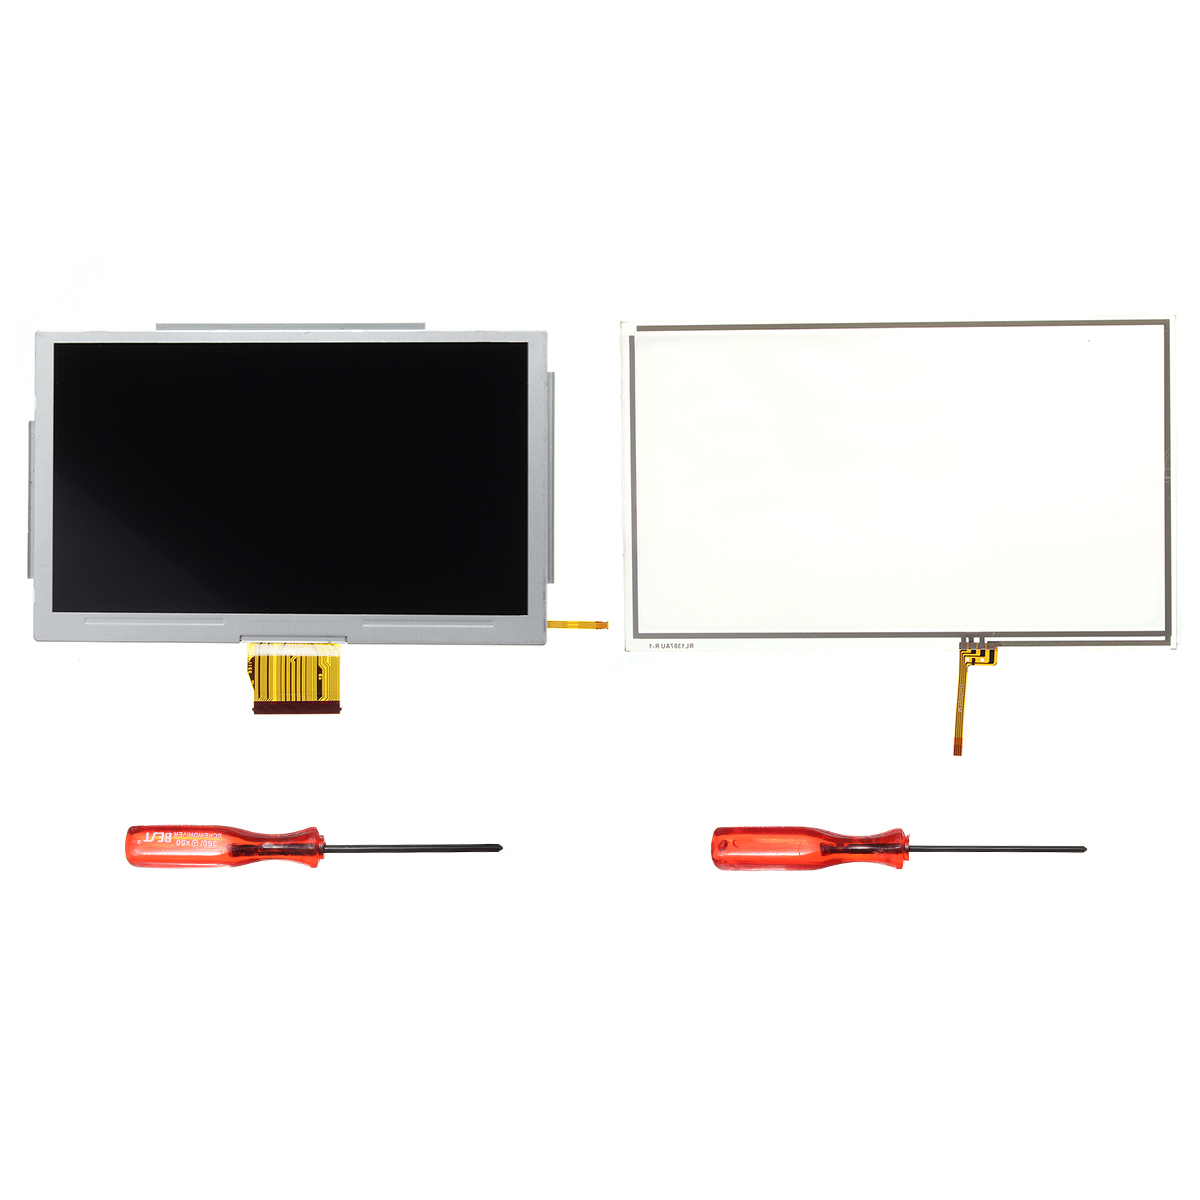 

Replacement 2 Tools LCD Screen Digitizer Repair Tool Touchscreen for Nintendo Wii U Game Console